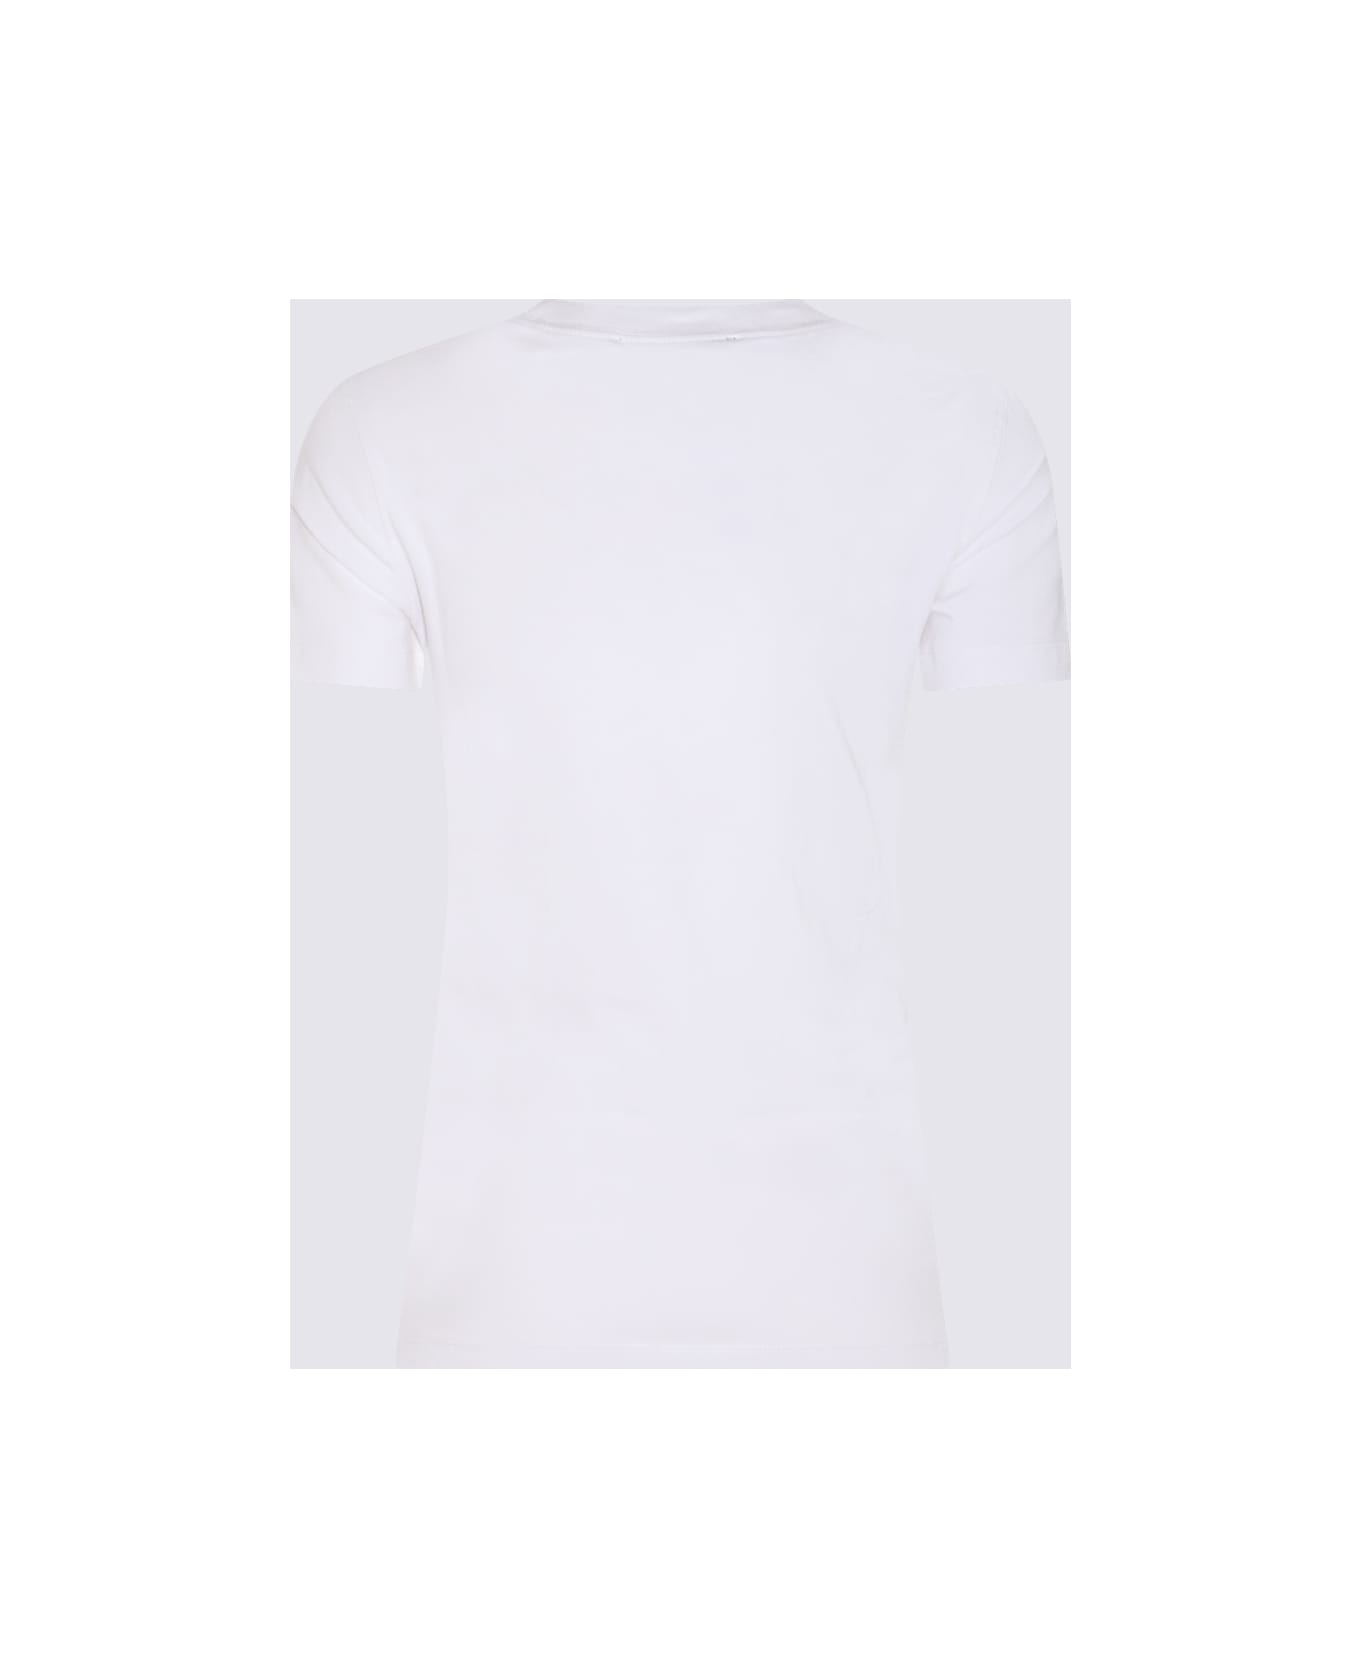 Versace Jeans Couture White And Yellow Cotton Blend T-shirt - WHITE